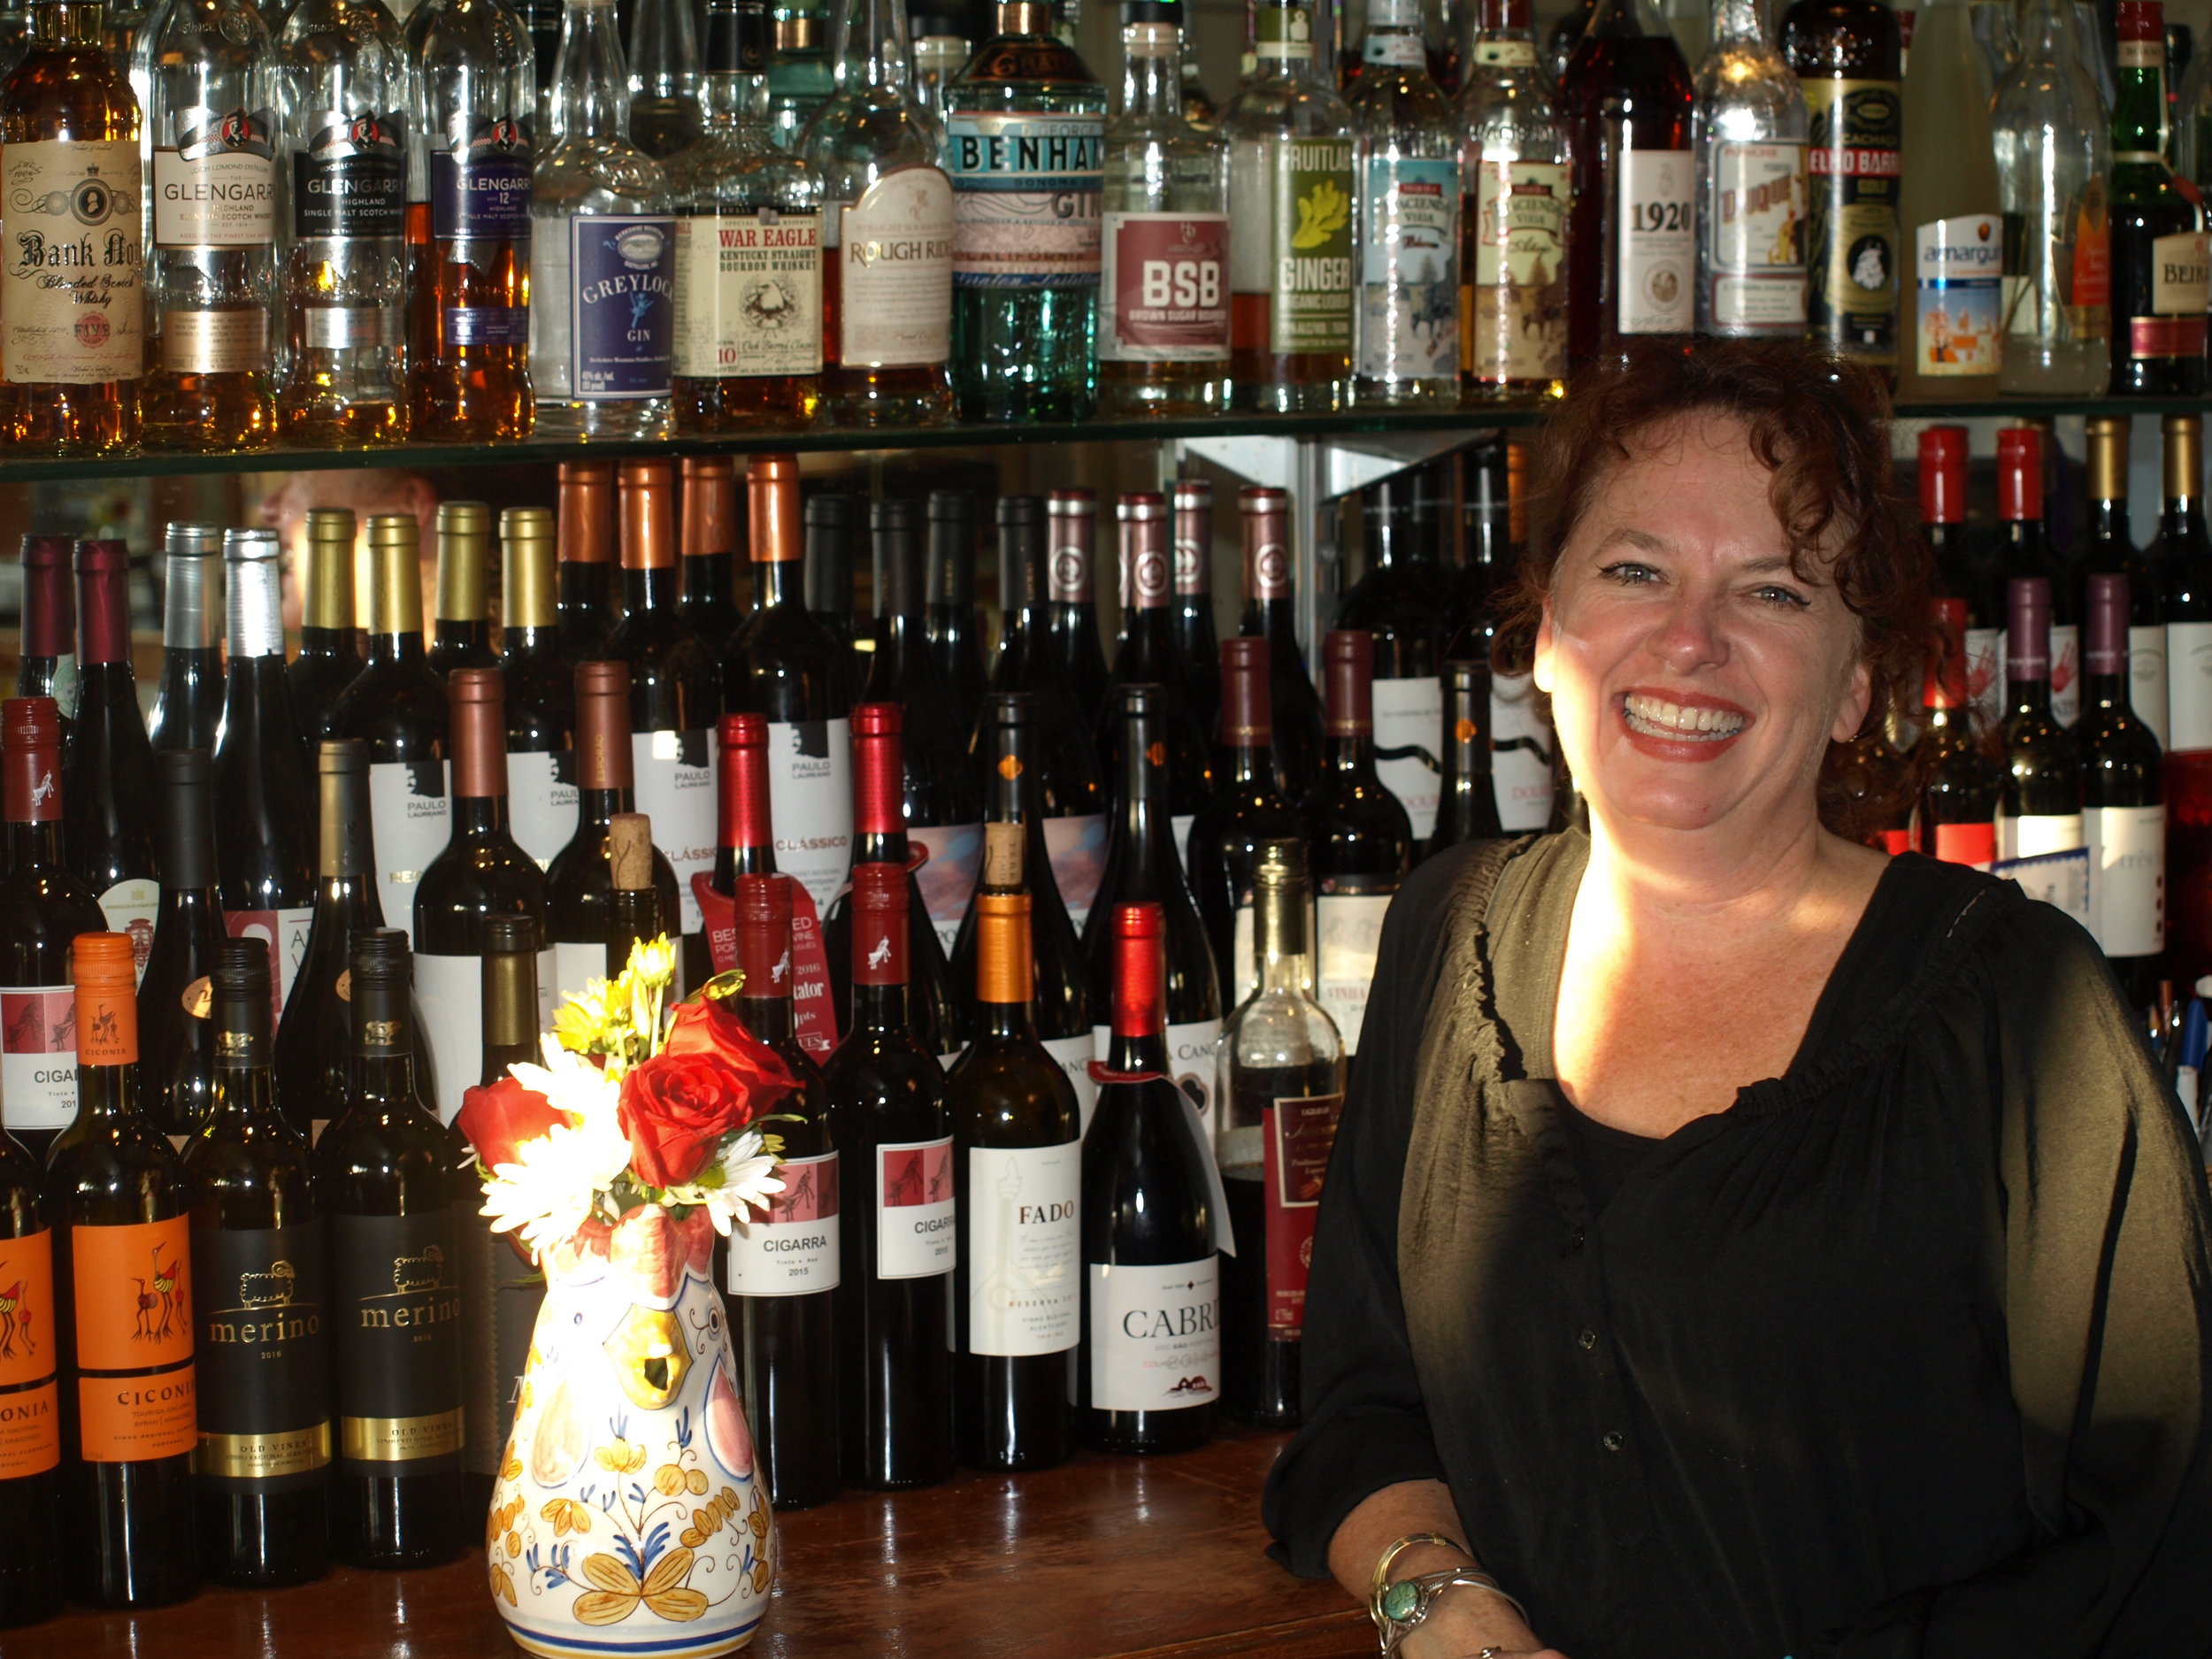   Fado’s owner Alison Steindler opened the Portuguese restaurant seven years ago to bring a taste of Portugal to Huntington.   Long Islander News Photo/Connor Beach  